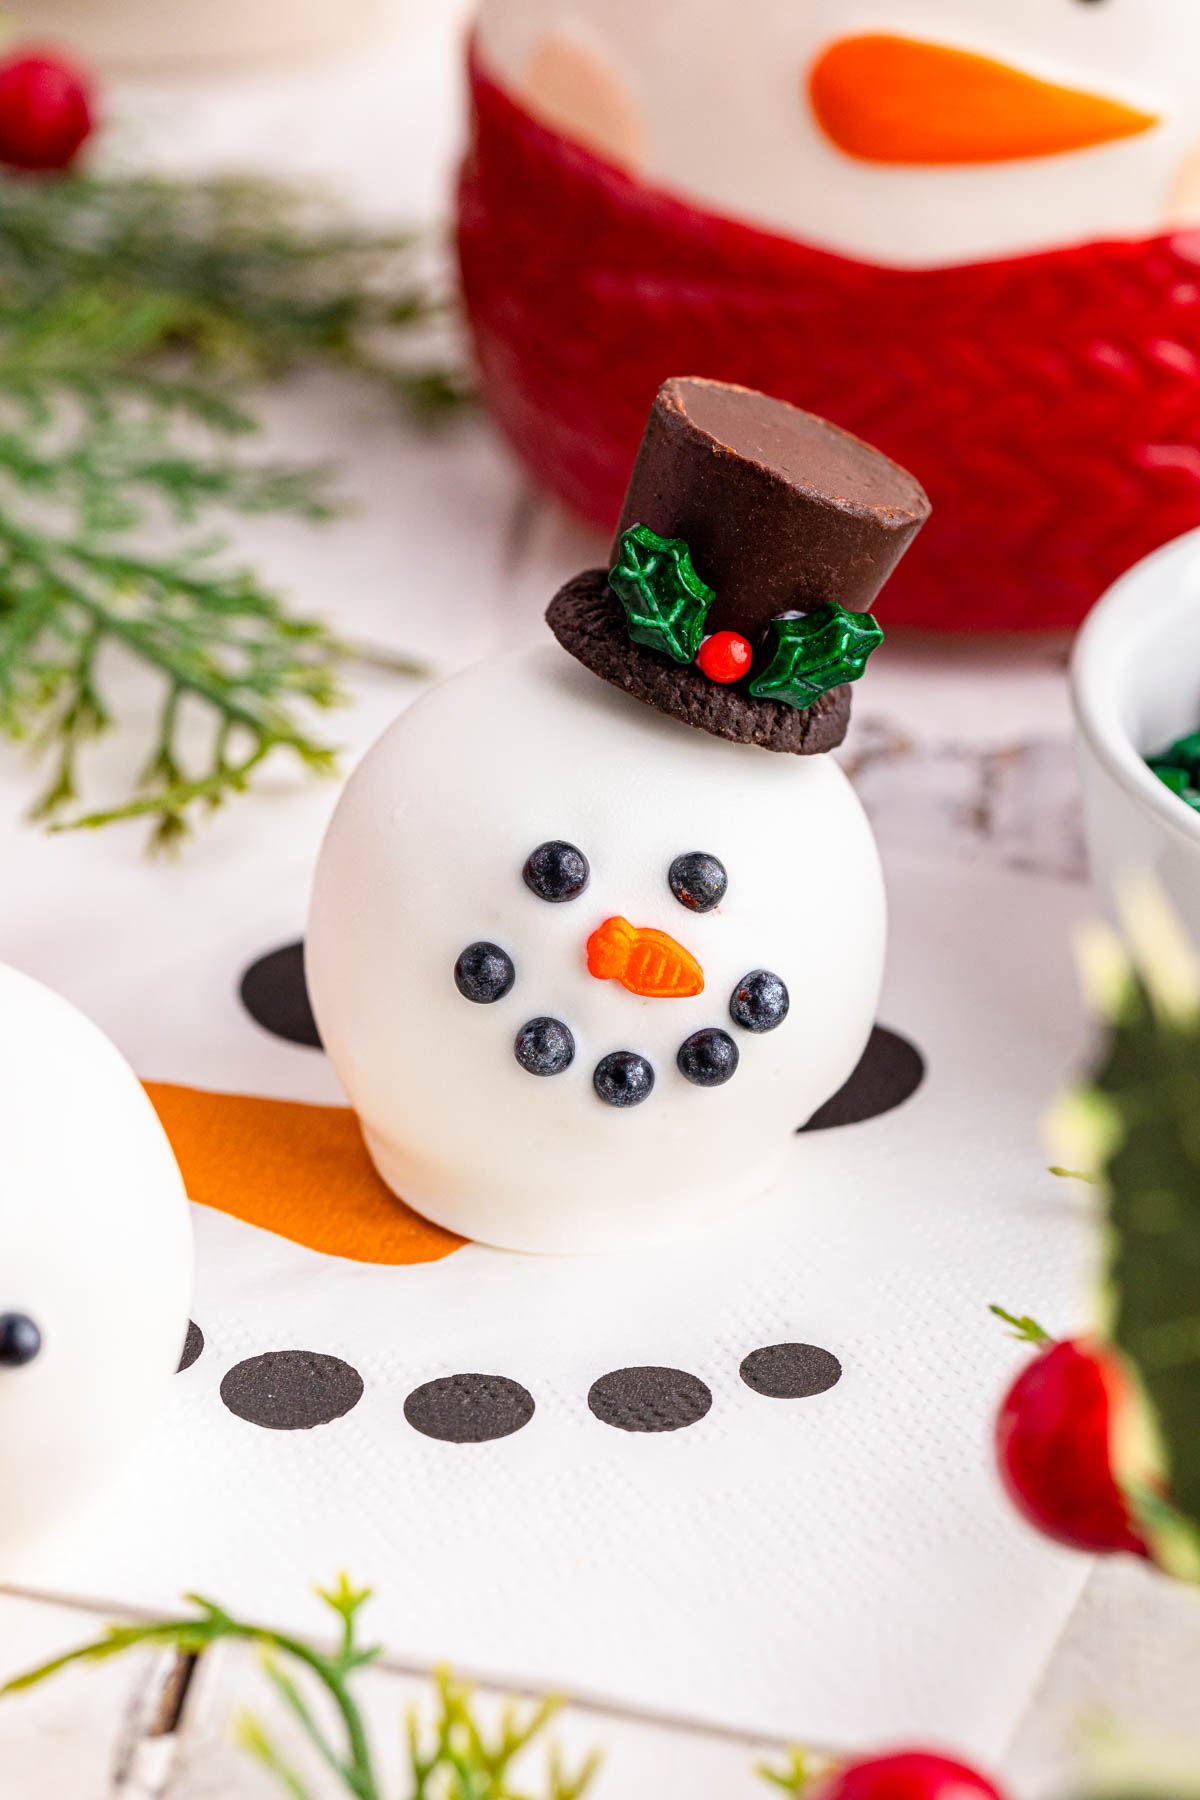 Snowman shaped chocolate balls on a table.